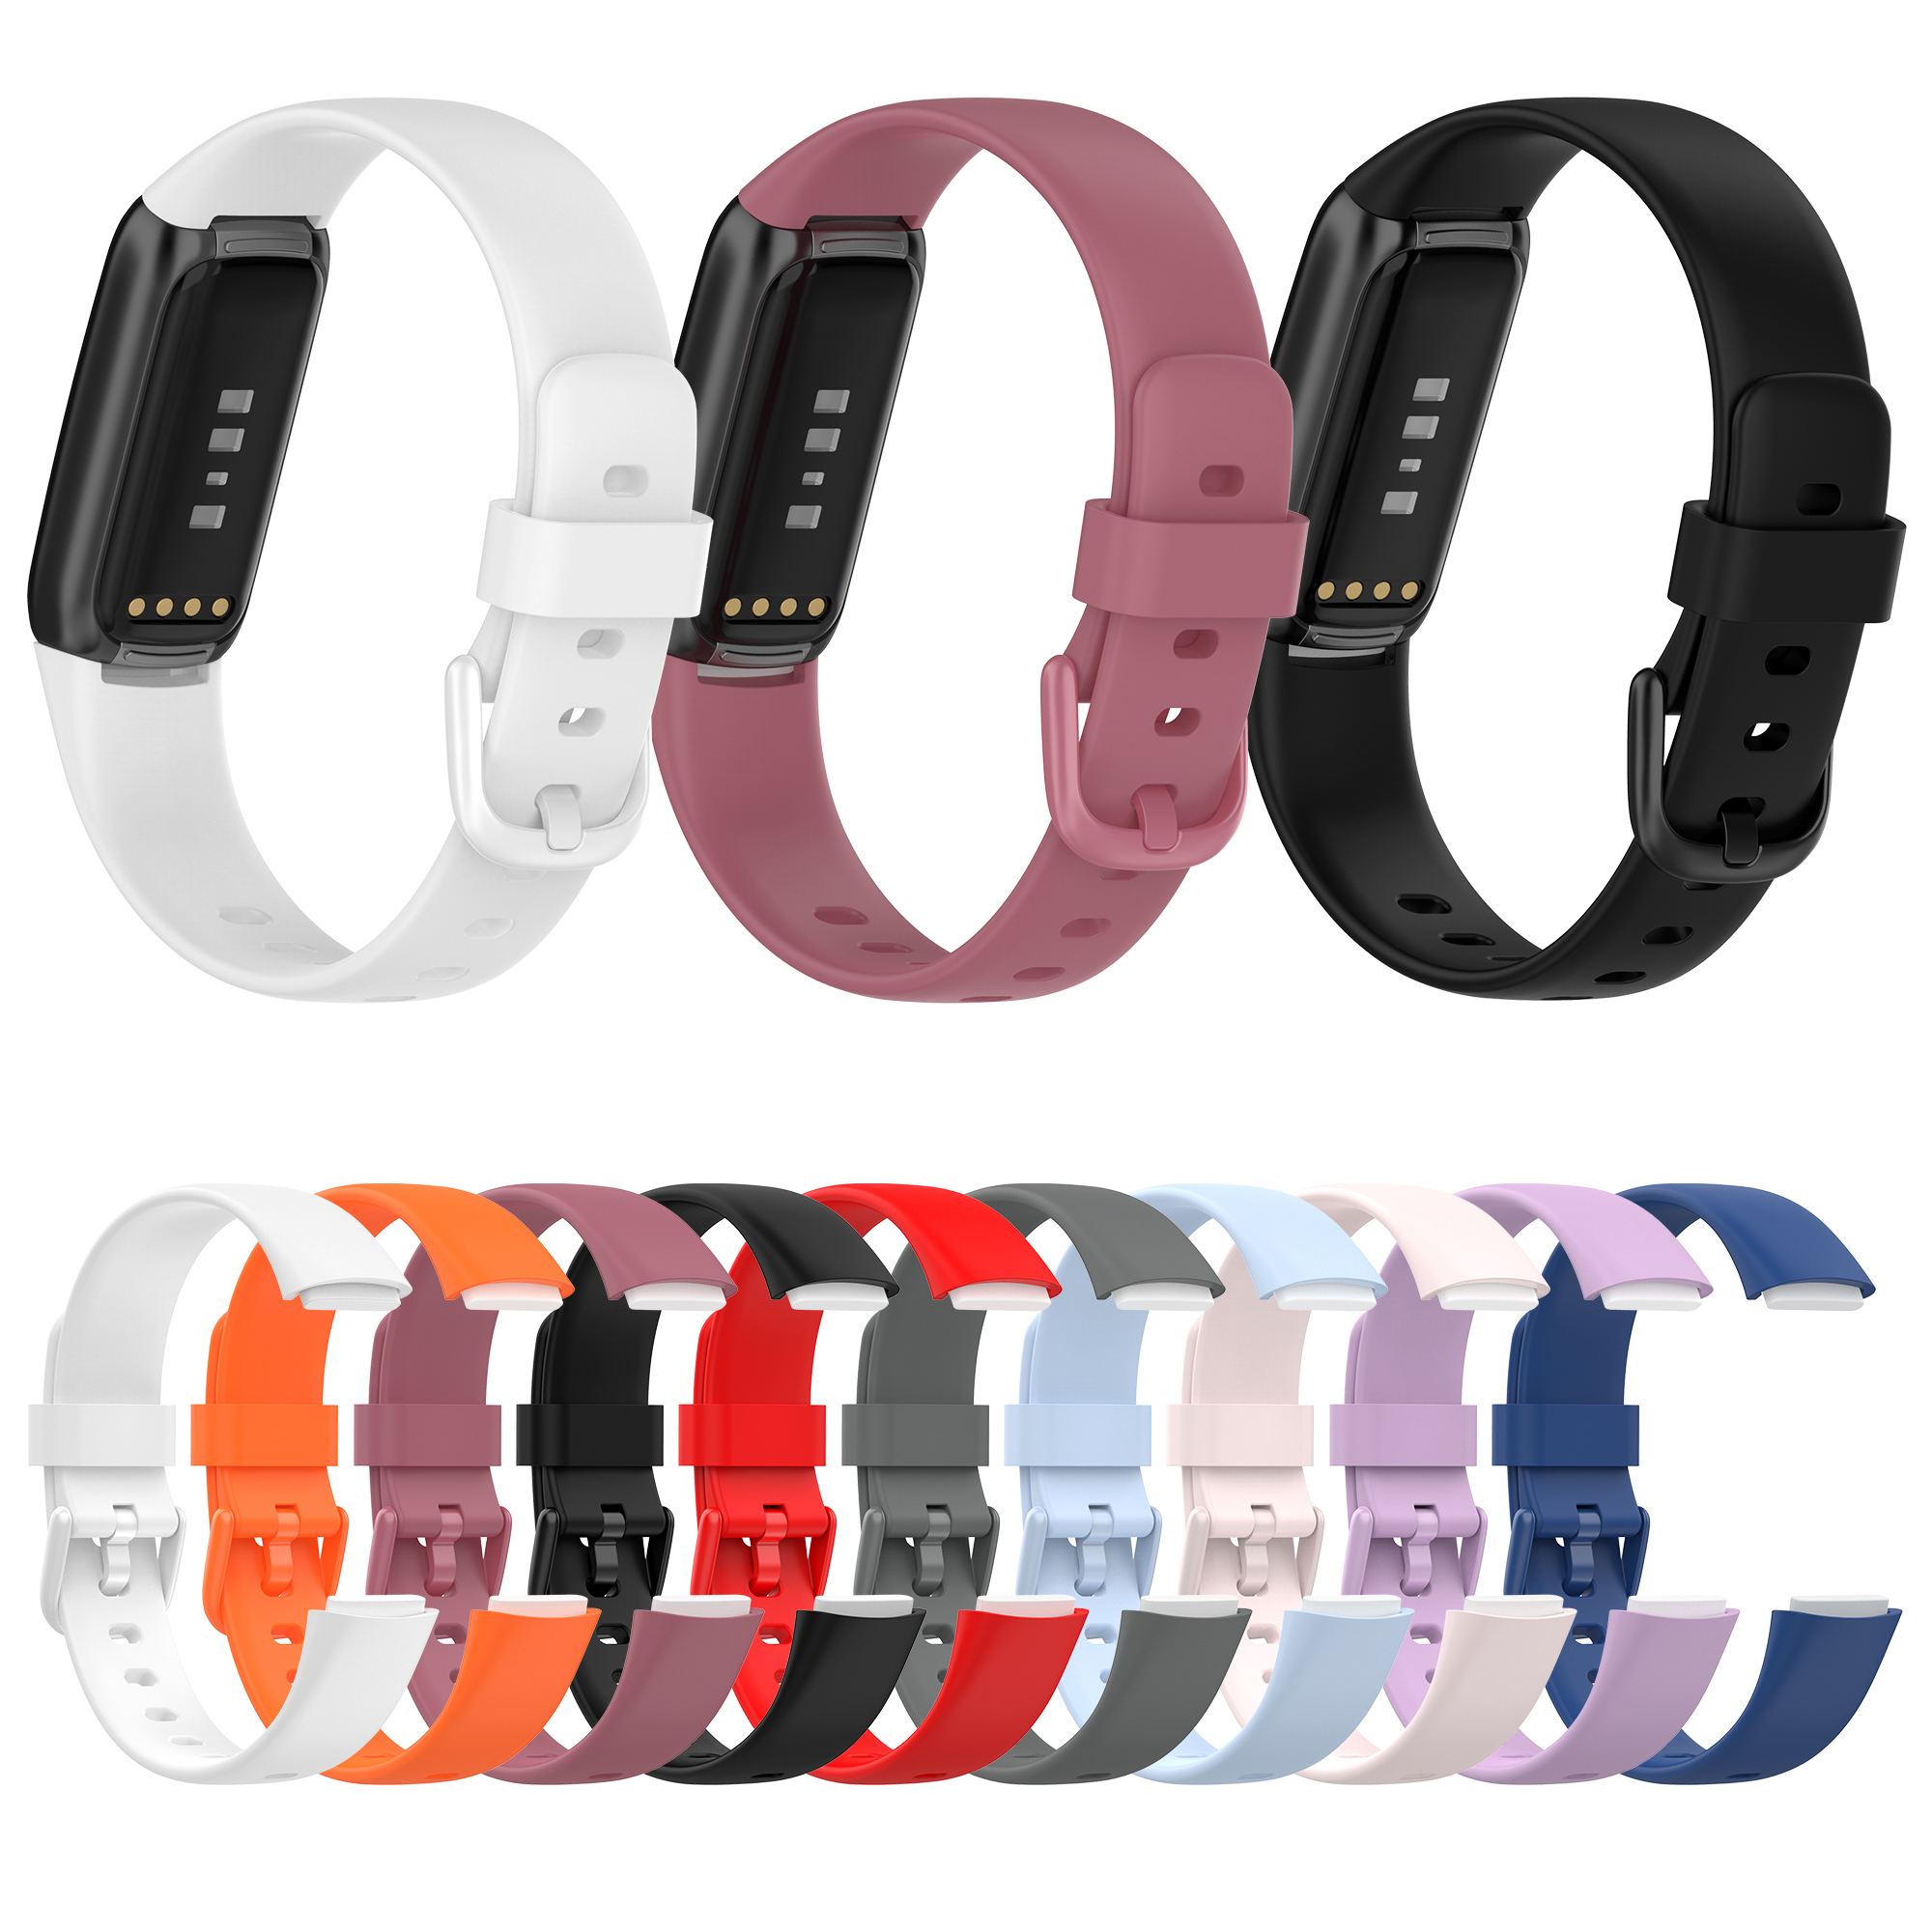 Bakeey-Comfortable-Sweatproof-Soft-Silicone-Watch-Band-Strap-Replacement-for-Fitbit-Luxe-1868080-2